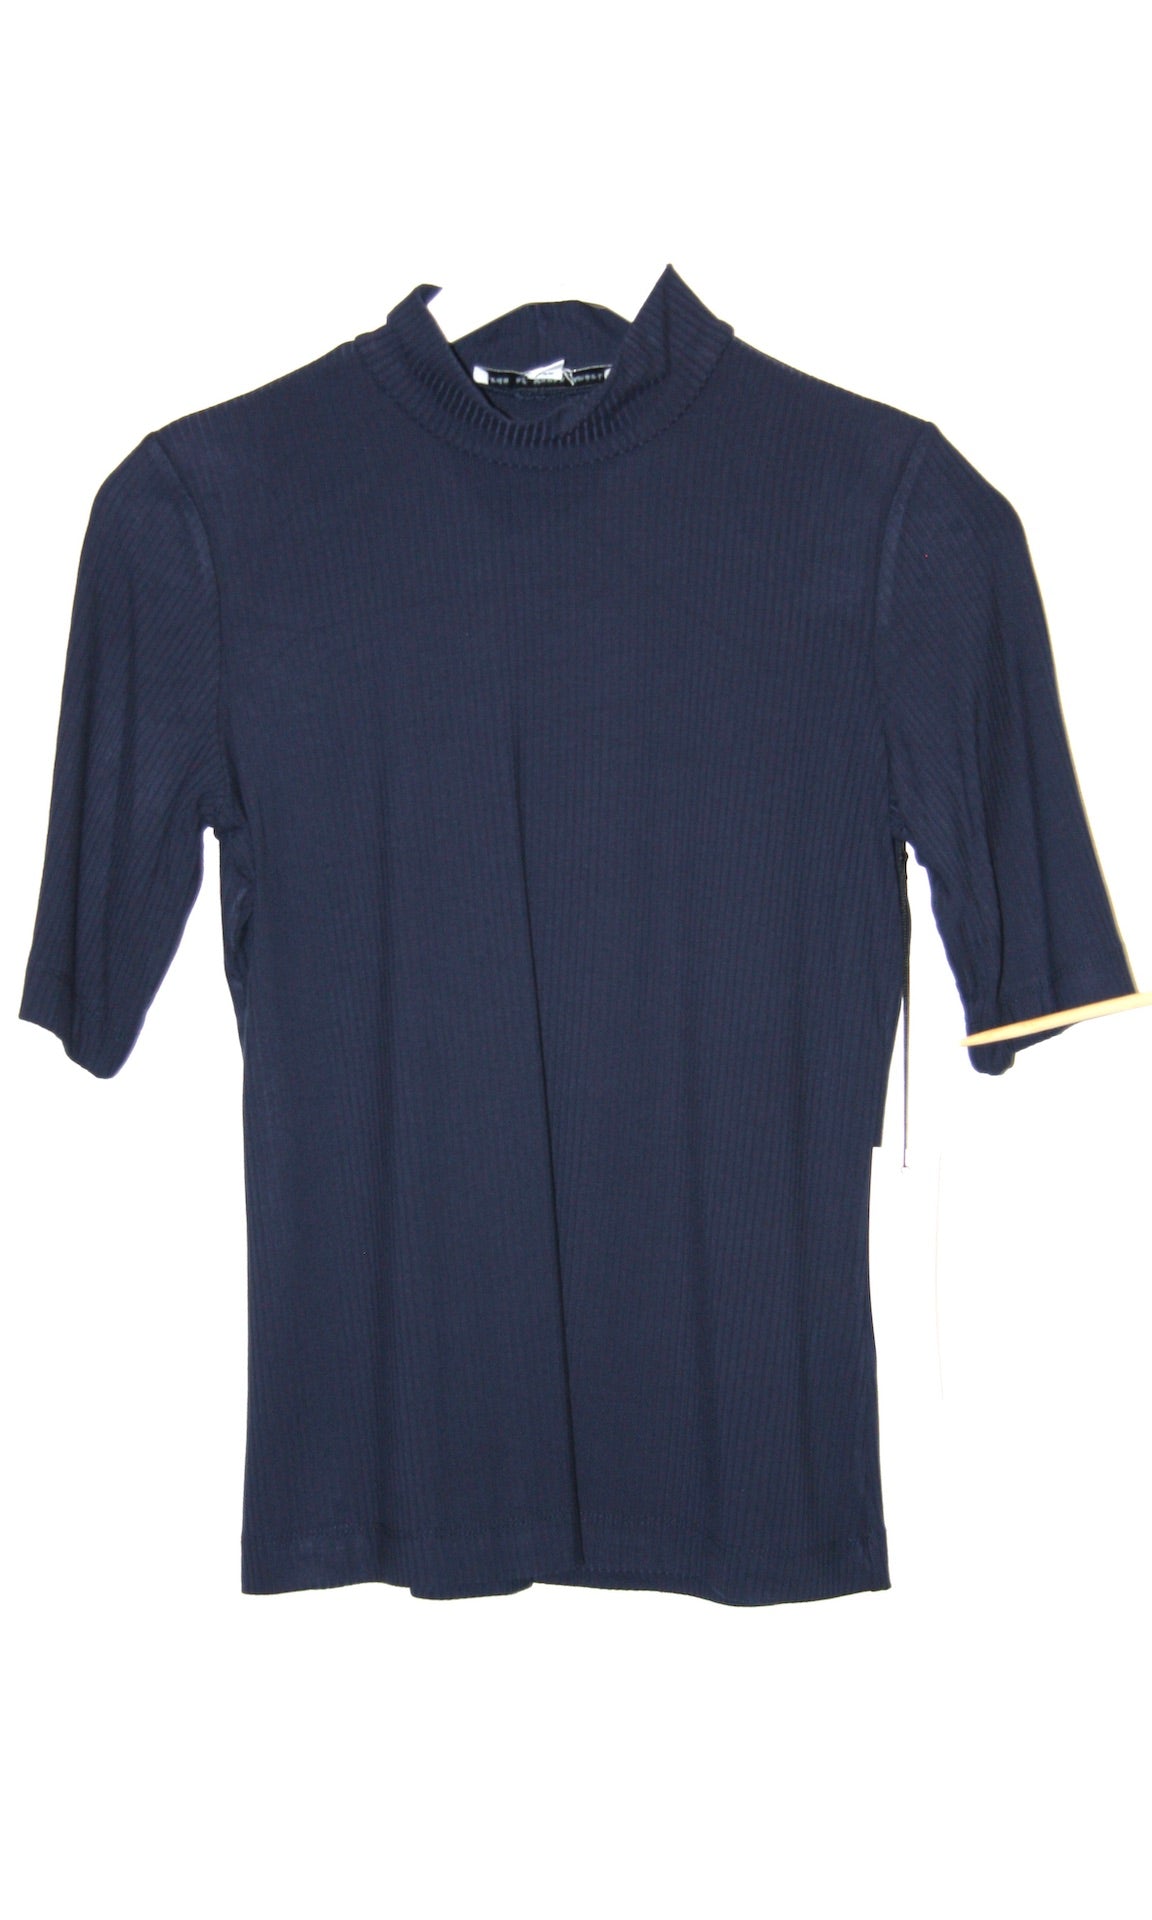 SS287 - M - Cutwater Top - Navy